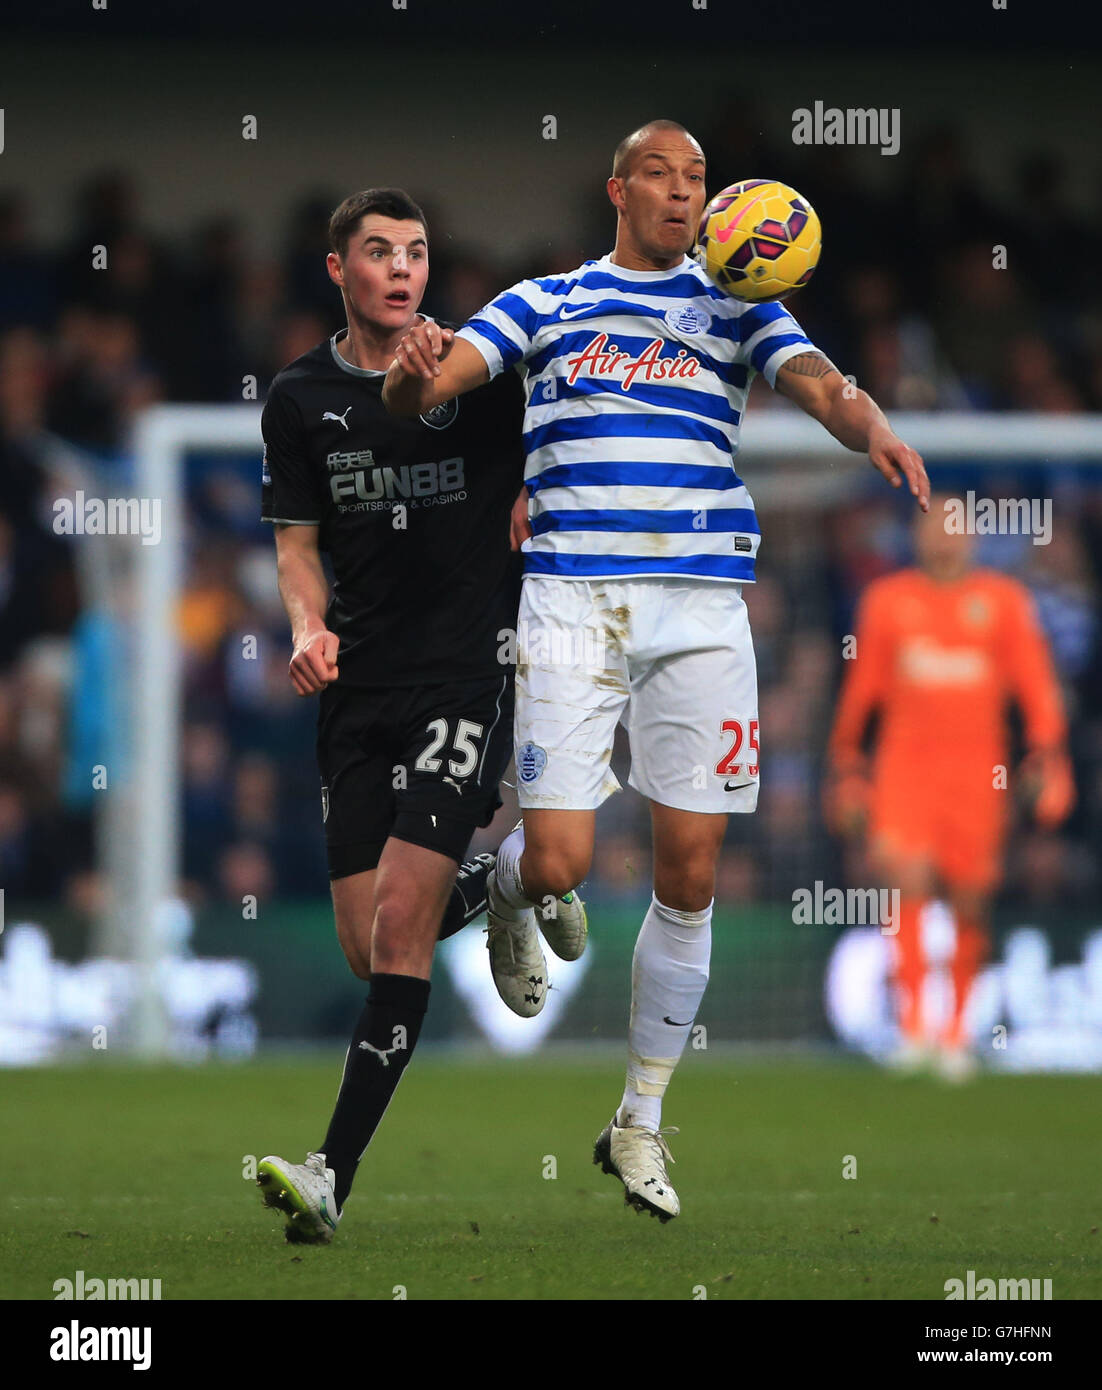 Queens Park Rangers' Bobby Zamora holds off challenge from Burnley's Michael Keane, during the Barclays Premier League match at Loftus Road, London. Stock Photo